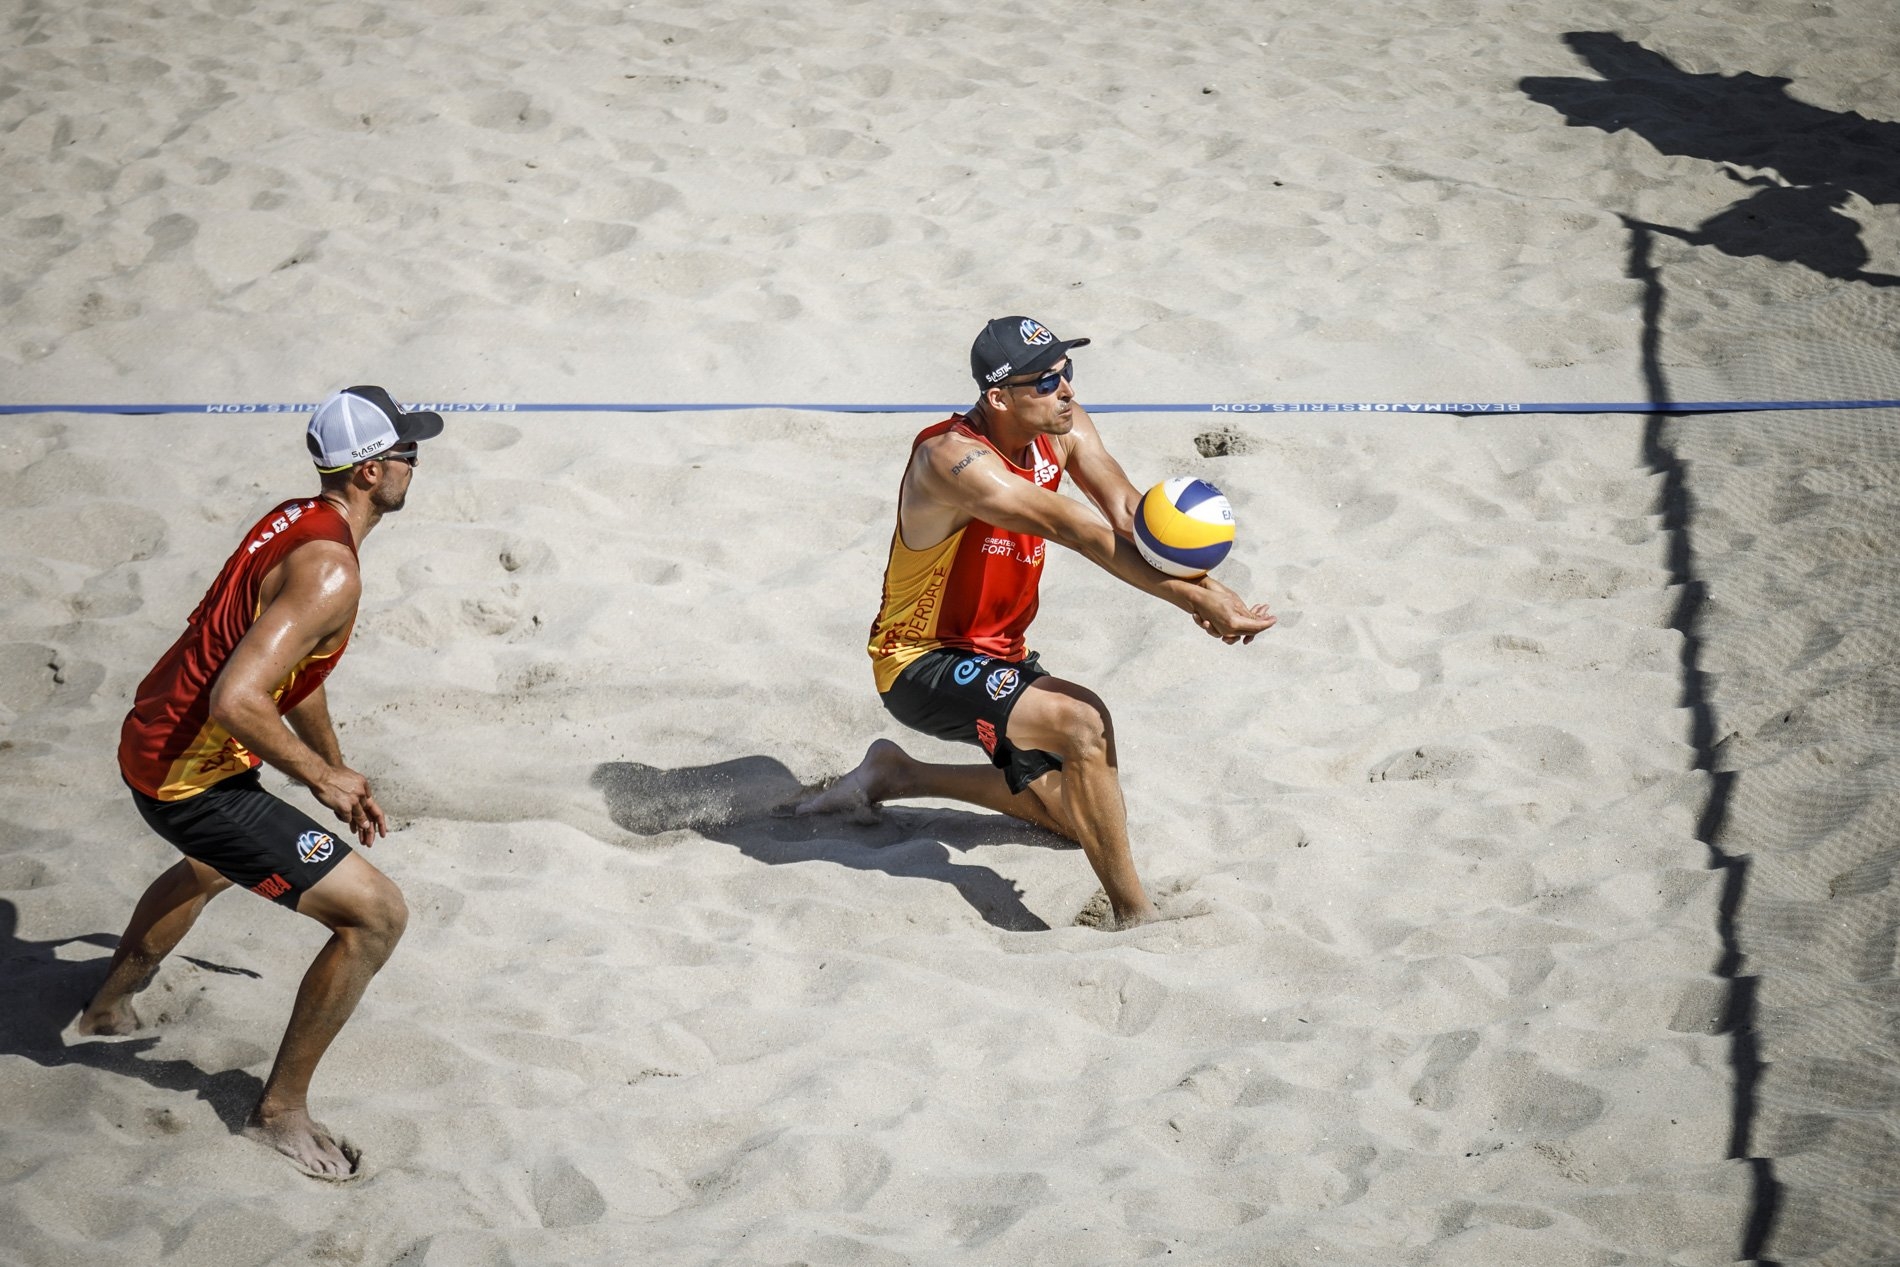 Spain's Herrera and Gavira are still undefeated in the Fort Lauderdale Major